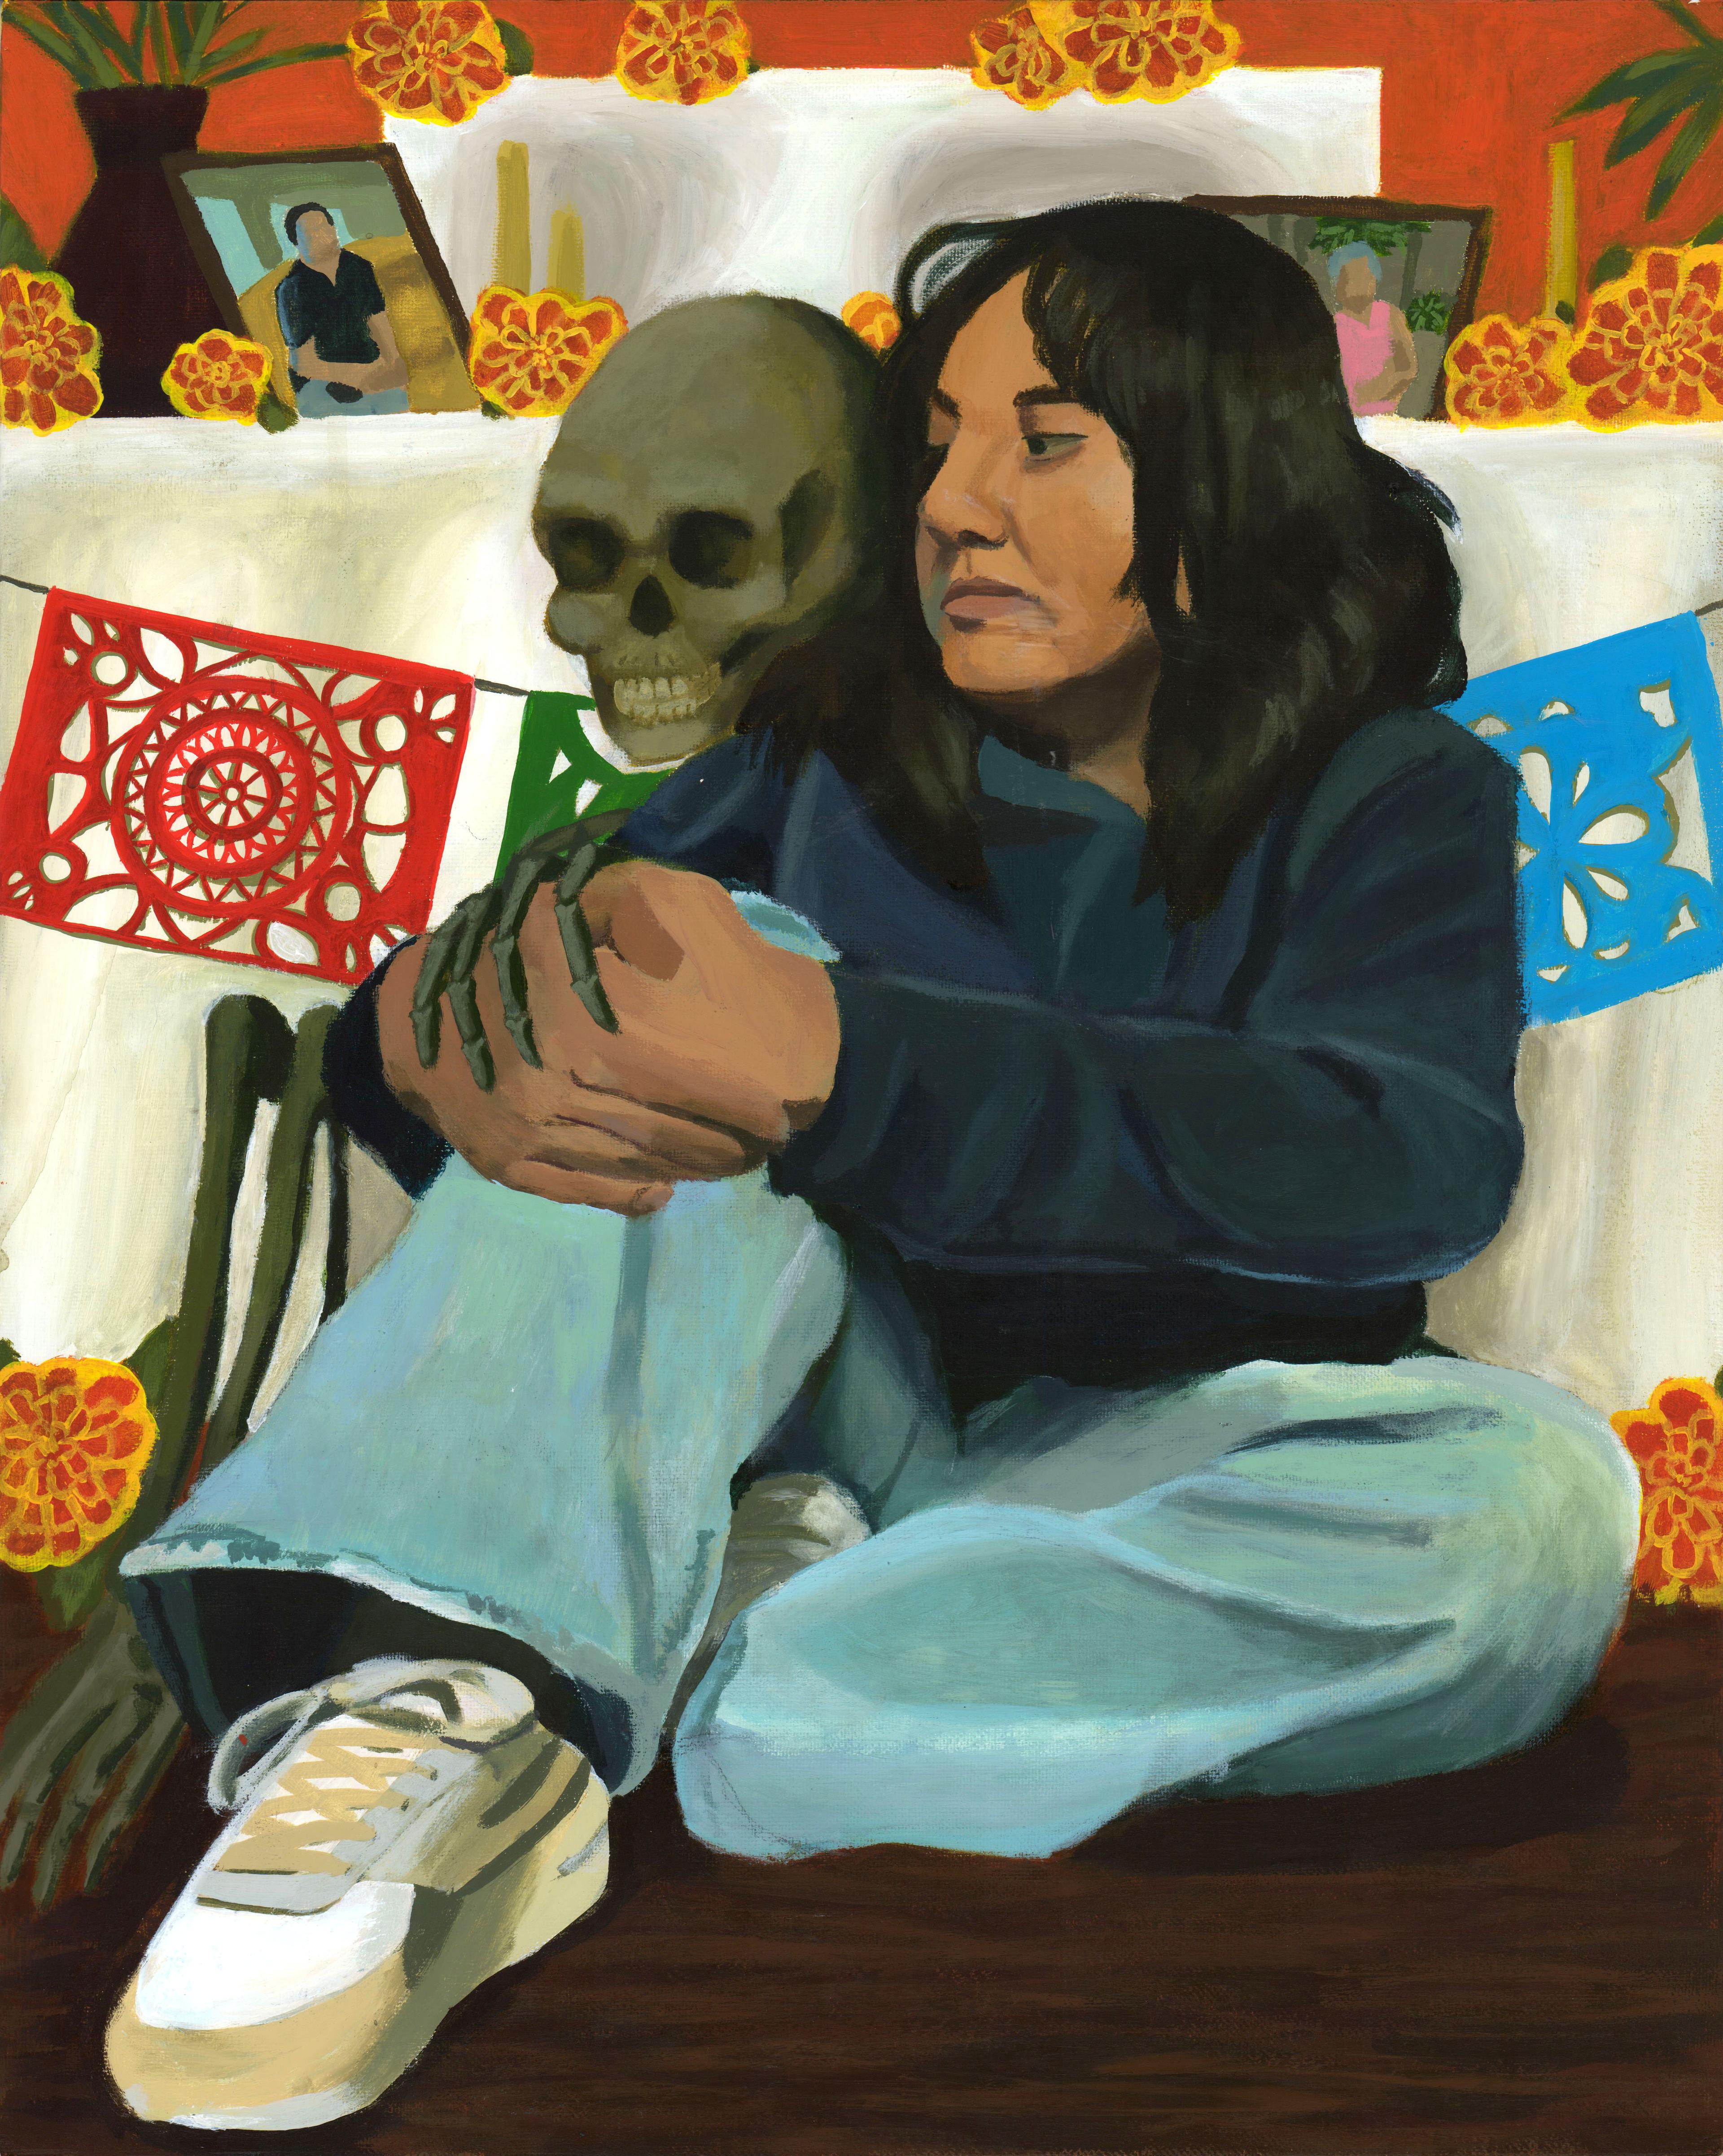 Acrylic painting of an adolescent girl sitting on a brown floor, leaning against a table covered with a white tablecloth, and clasping her hands together on top of her raised right knee. She wears light blue jeans, white sneakers, and a dark blue long-sleeved shirt. She faces to the left and has long black hair that extends beyond her shoulders. Directly next her to the left, a gray skeleton sits right up against her, with one of its bony hands resting on top of her hands. The skull is directly next to her face. Yellow and red flowers adorn the tabletop and floor around the girl. A small framed portrait photo of a person leans against a potted plant on the table top to the left. The wall behind the table is a bold red. Ornate red, green, and blue paper cutout flags hang from a wire in front of the tablecloth, directly behind the girl's back.